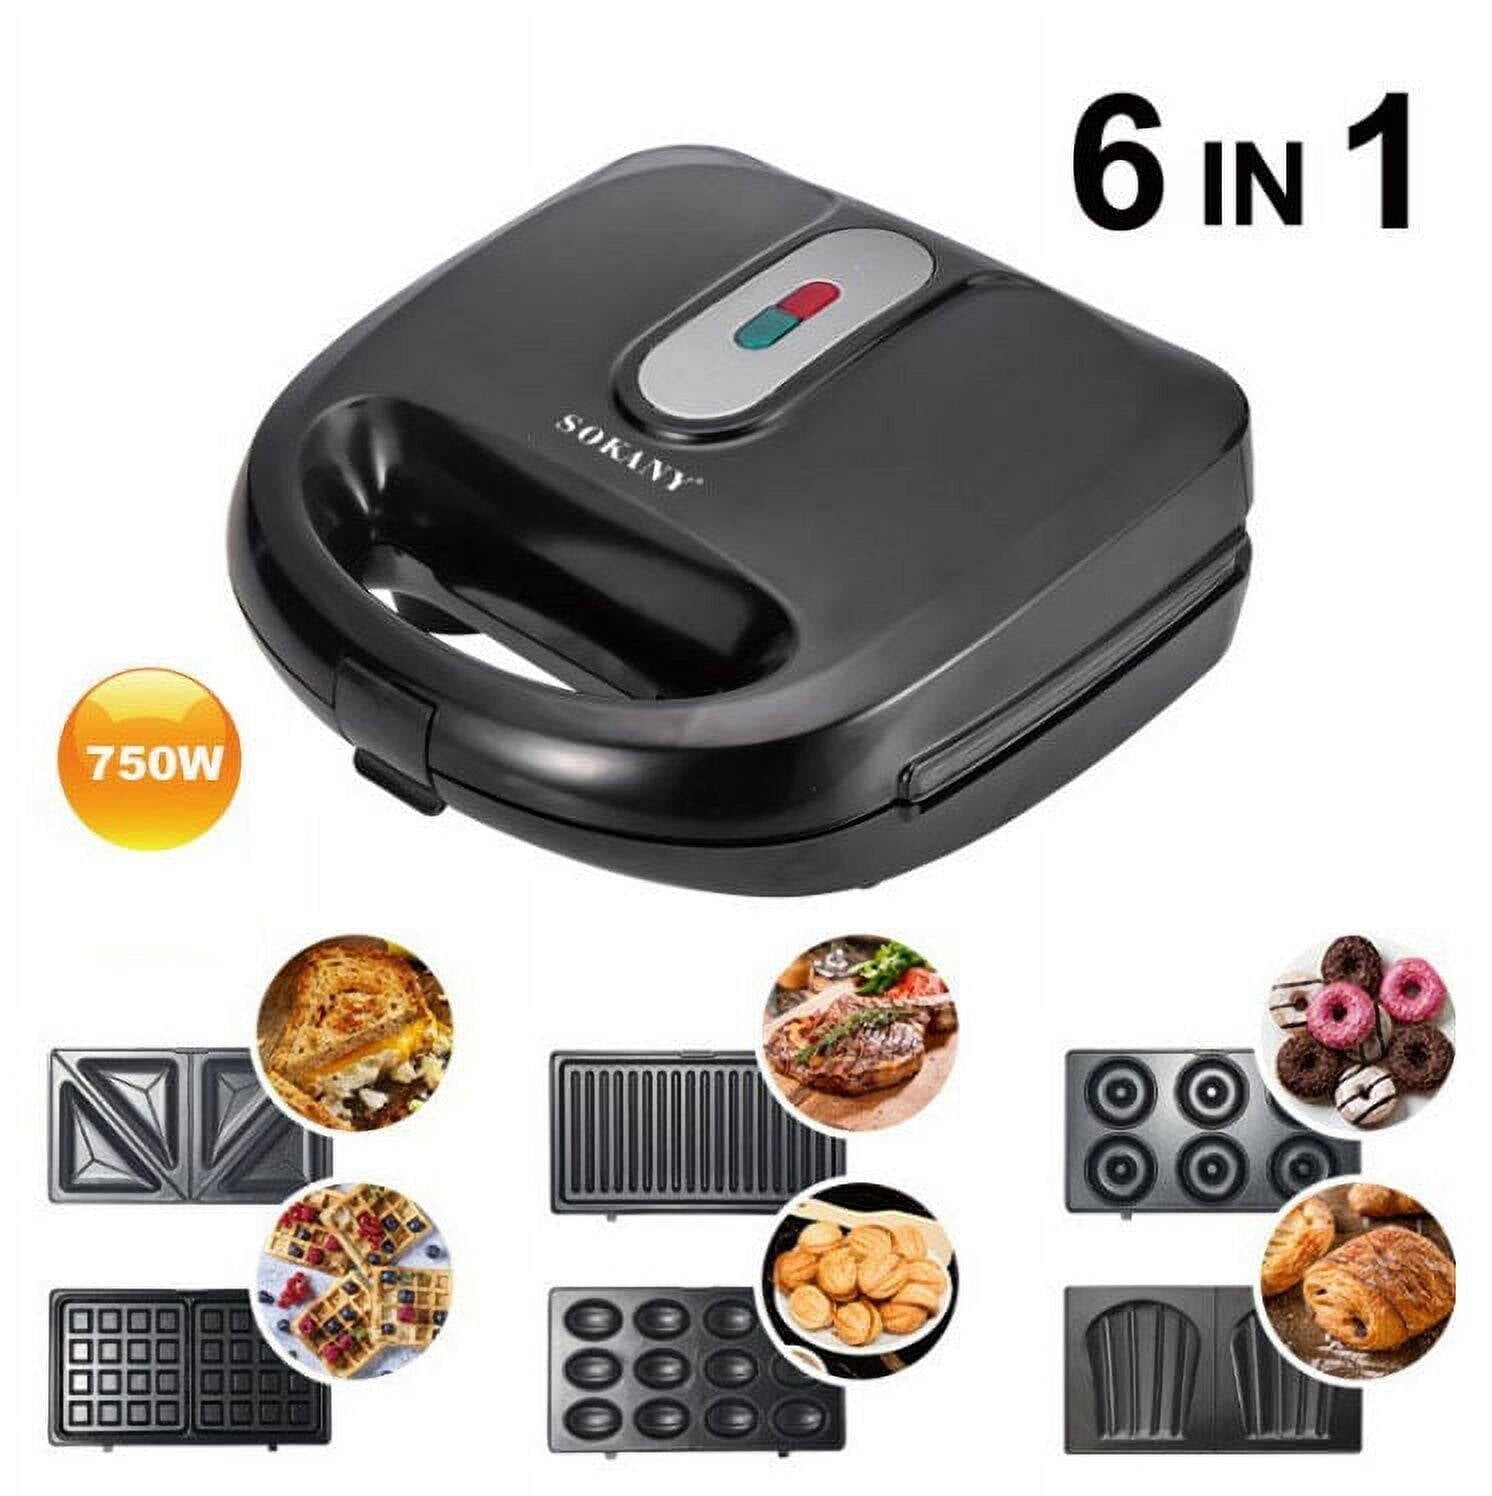 OSTBA 3 in 1 Sandwich Maker Panini Press Waffle Iron Set with 3 Removable  Non-Stick Plates, 750W Toaster Perfect for Sandwiches Grilled Cheese Steak